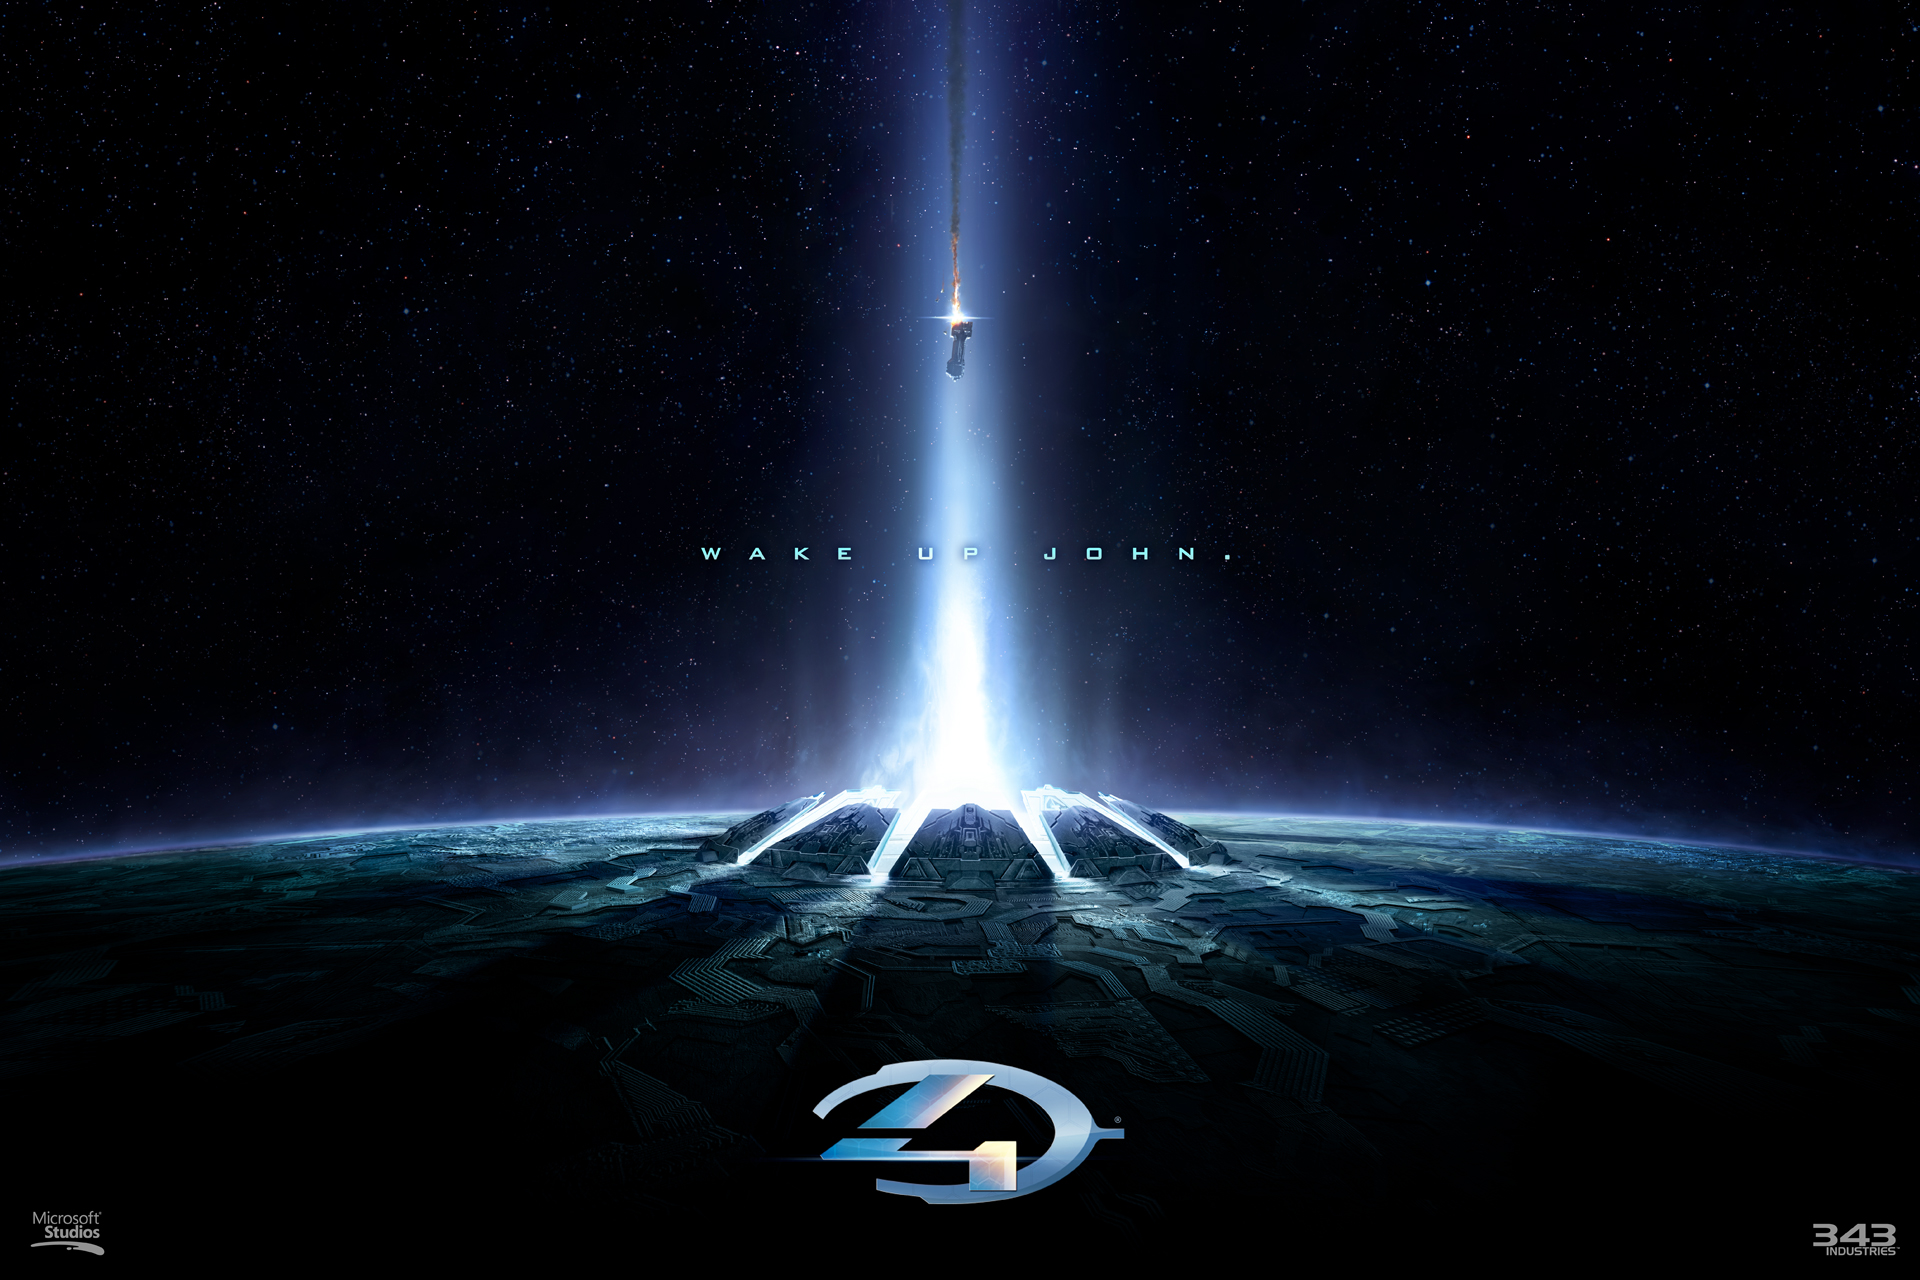 halo 4 wallpapers sd hd gaming now